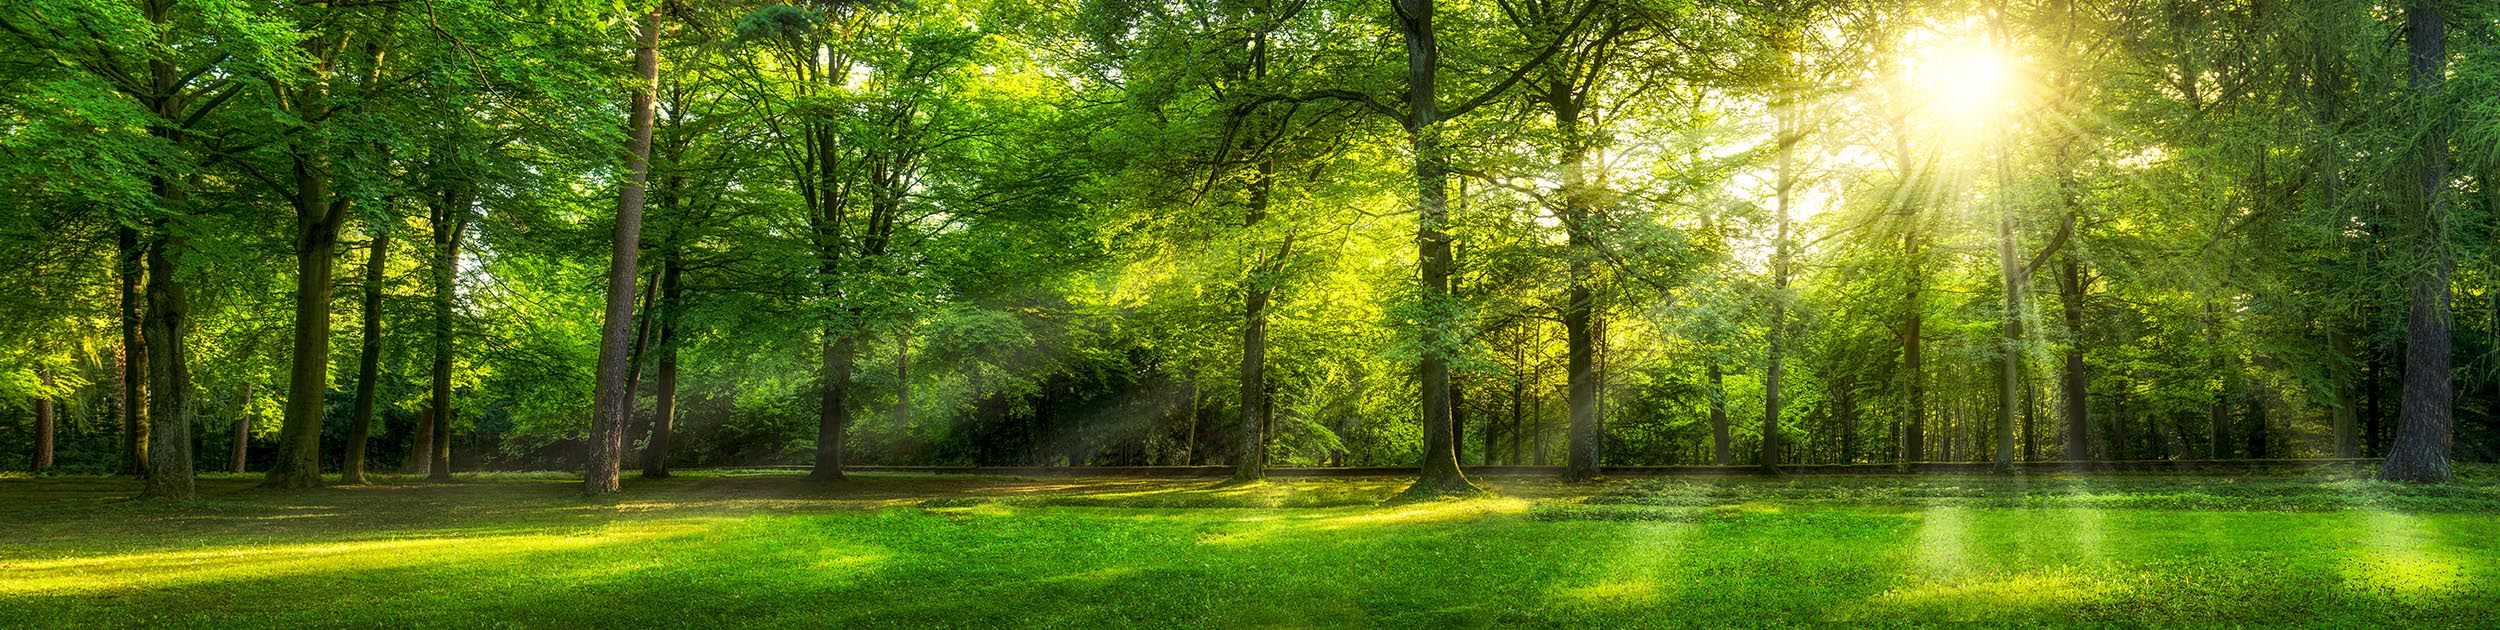 green grass and sunlit trees